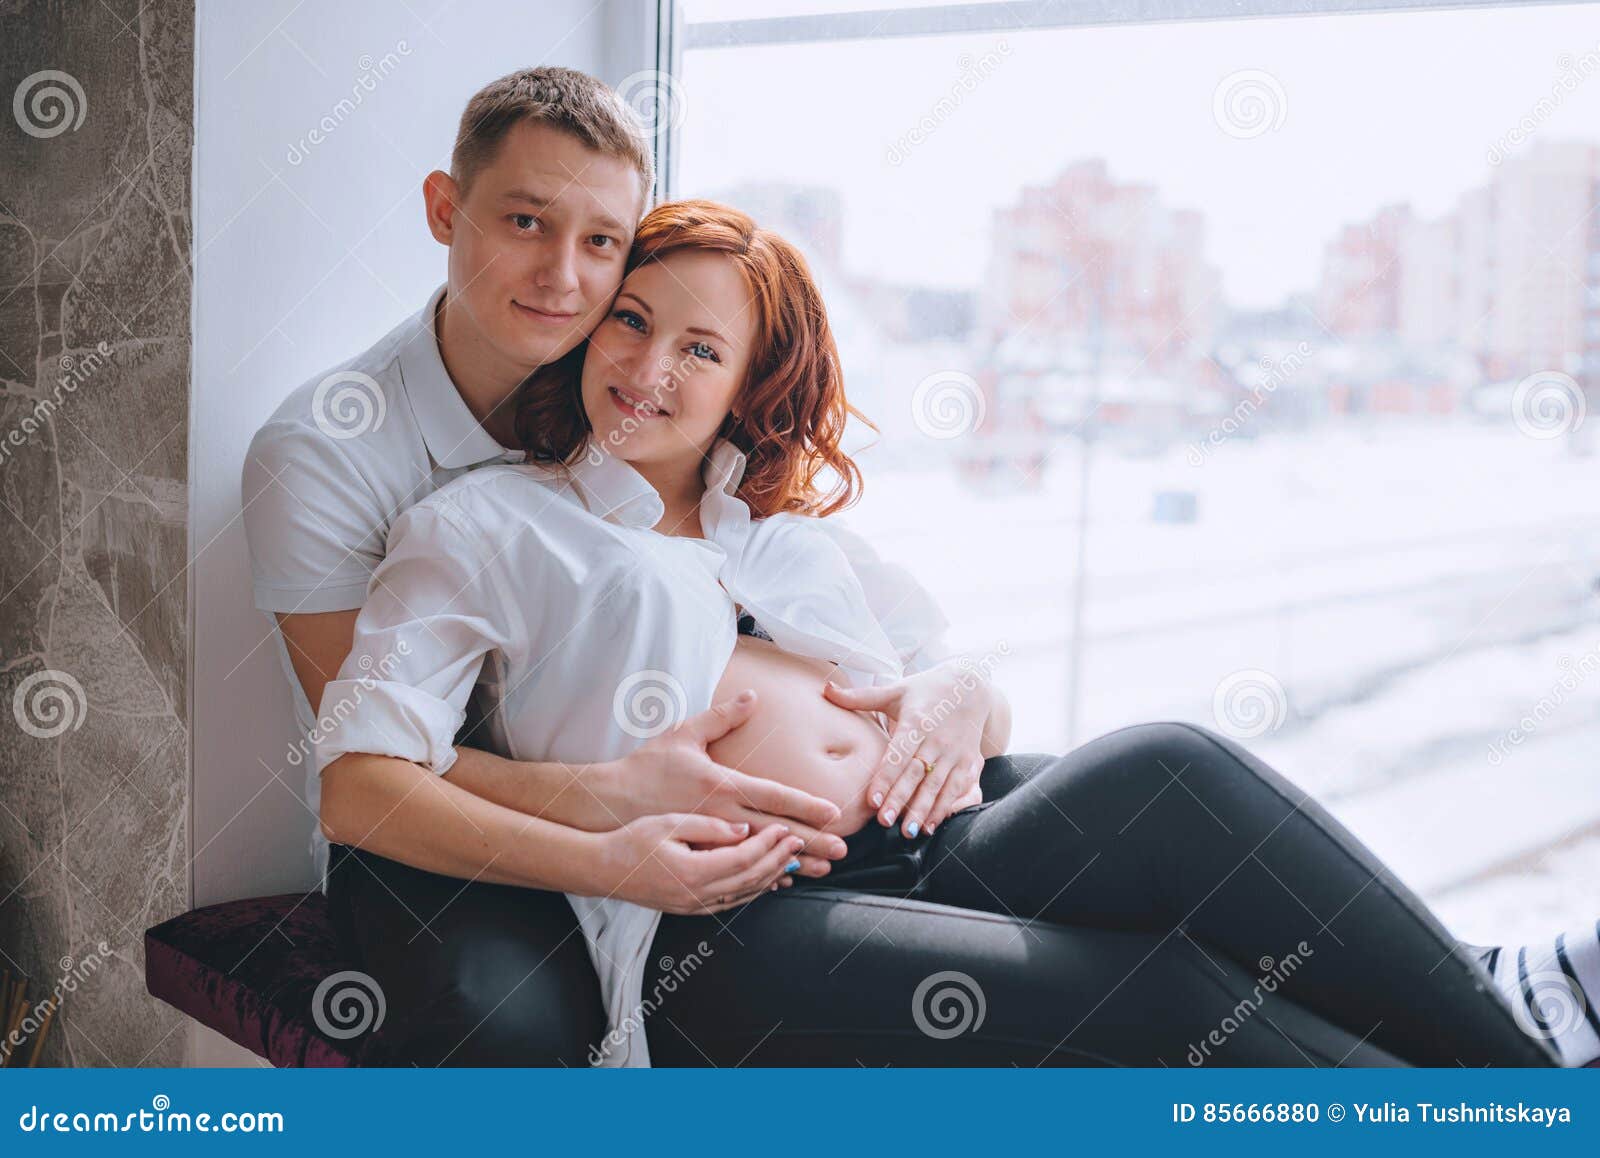 Red Hair Prego Nude - Young Pregnant Woman With Red Hair Sits On The Windowsill ...